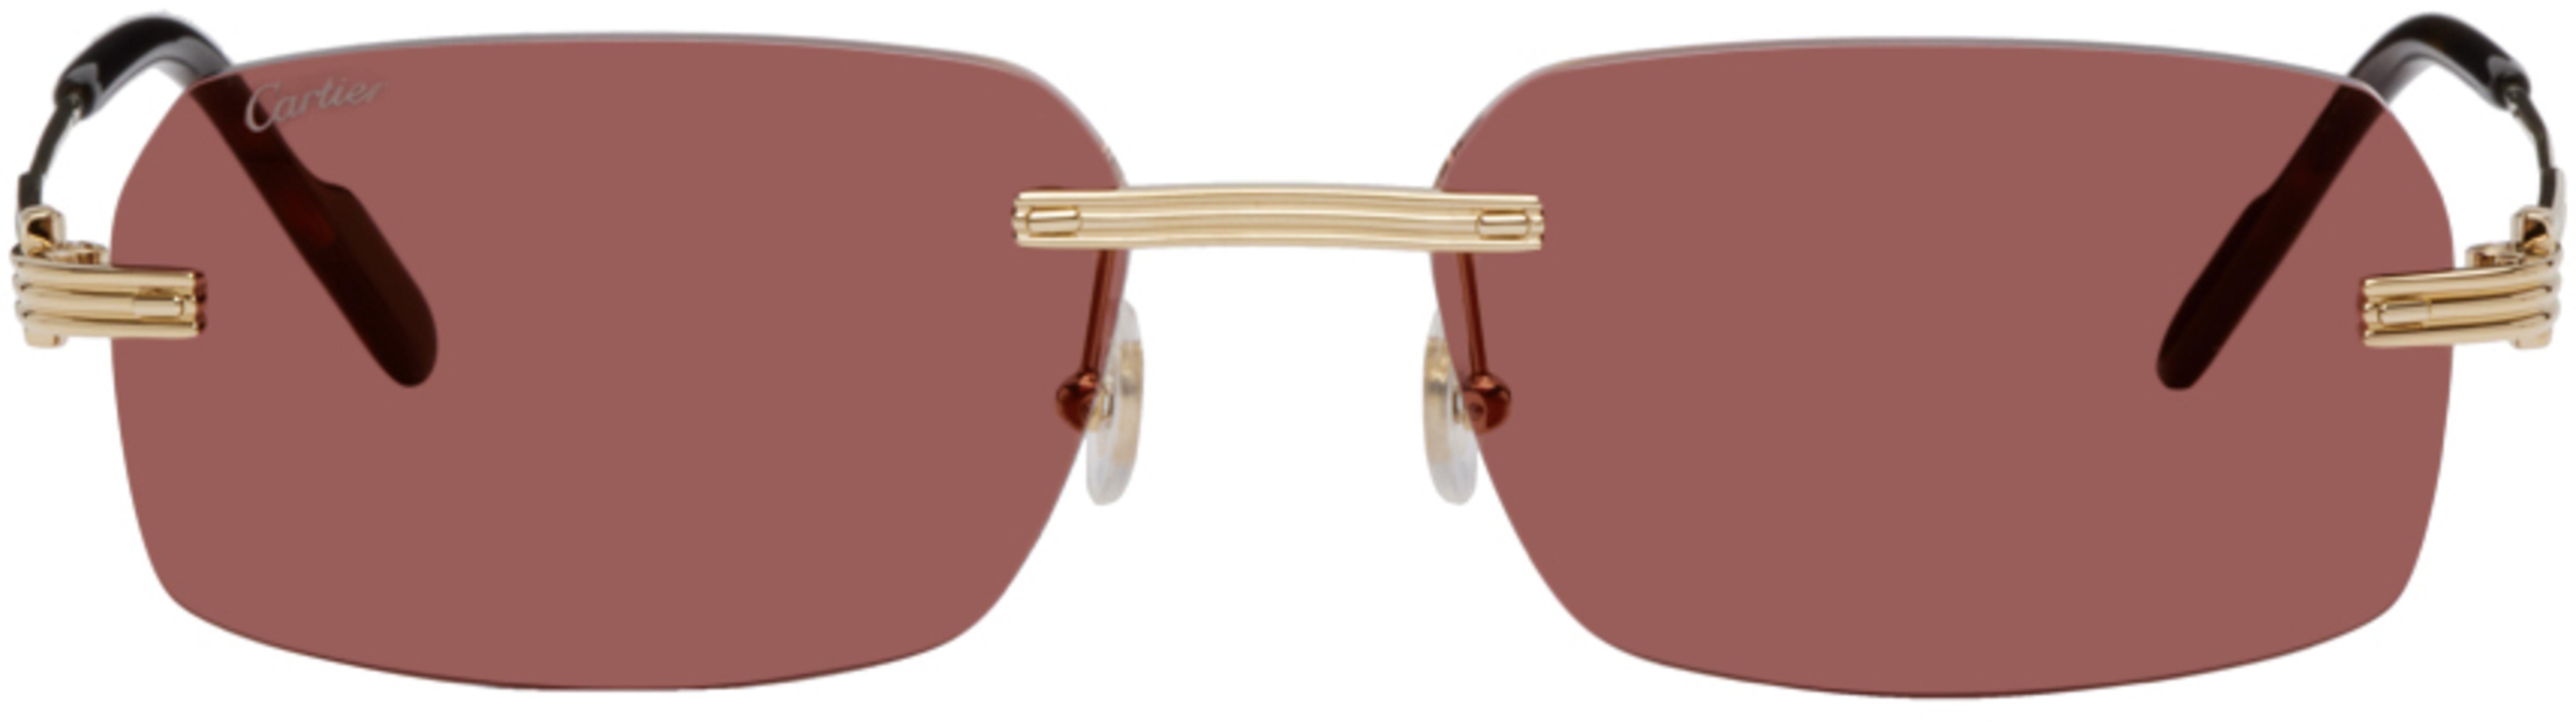 Gold Rimless Sunglasses by CARTIER